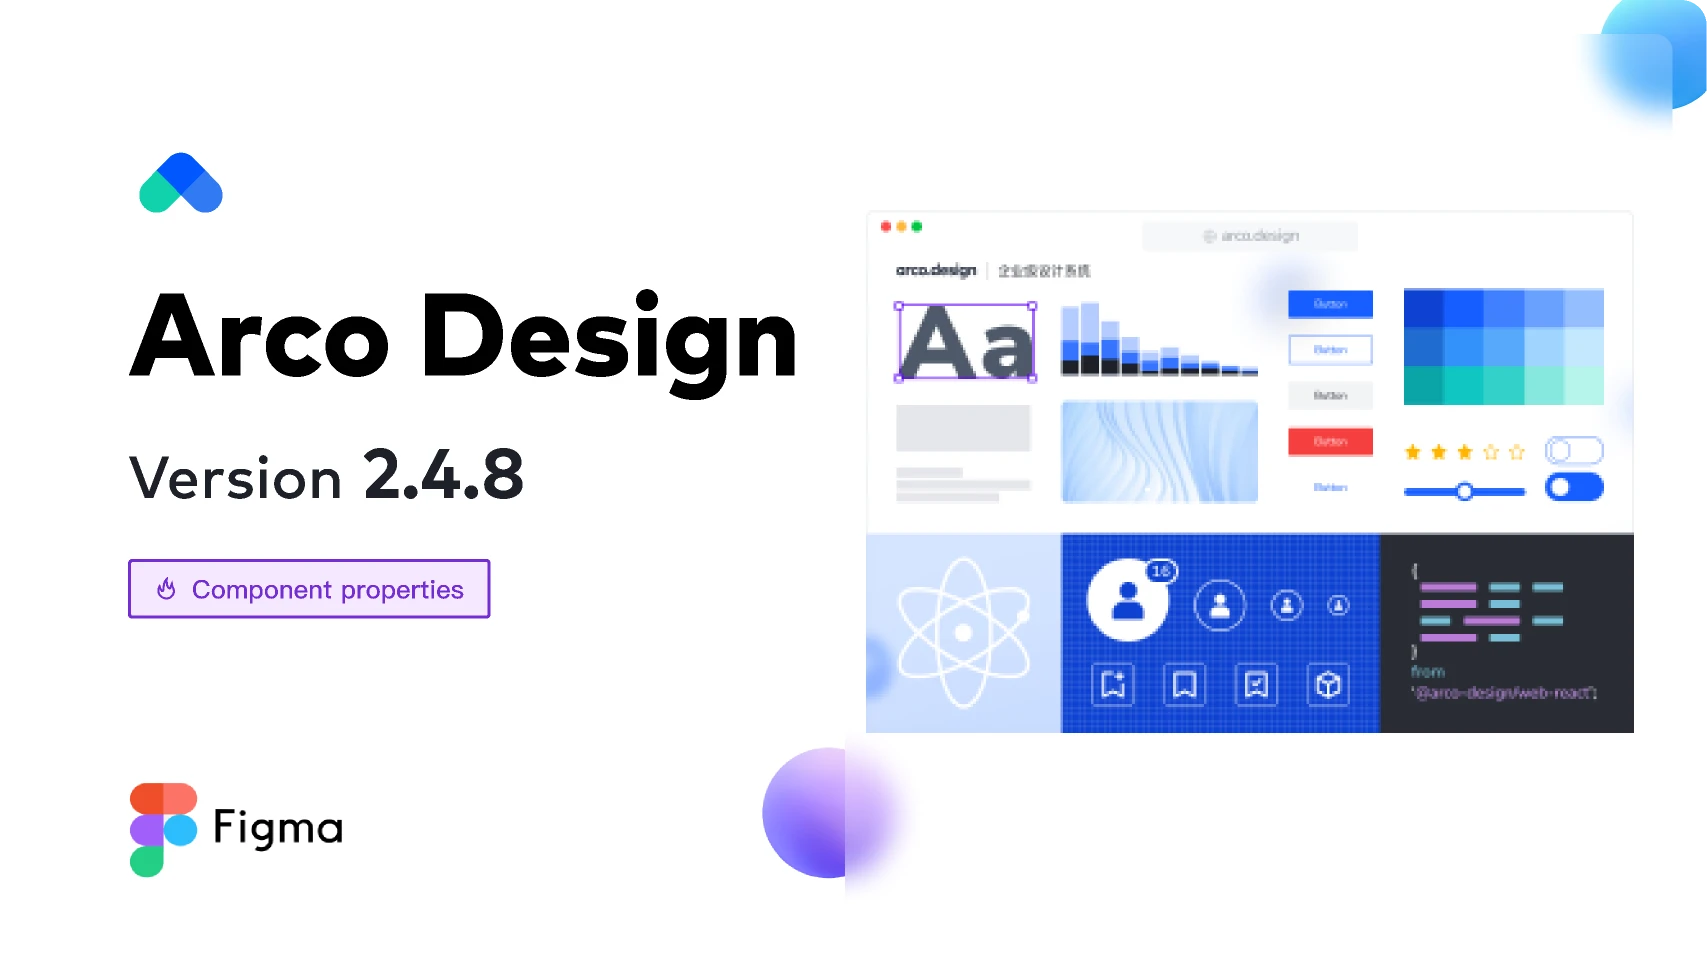 Arco Design System for Figma and Adobe XD